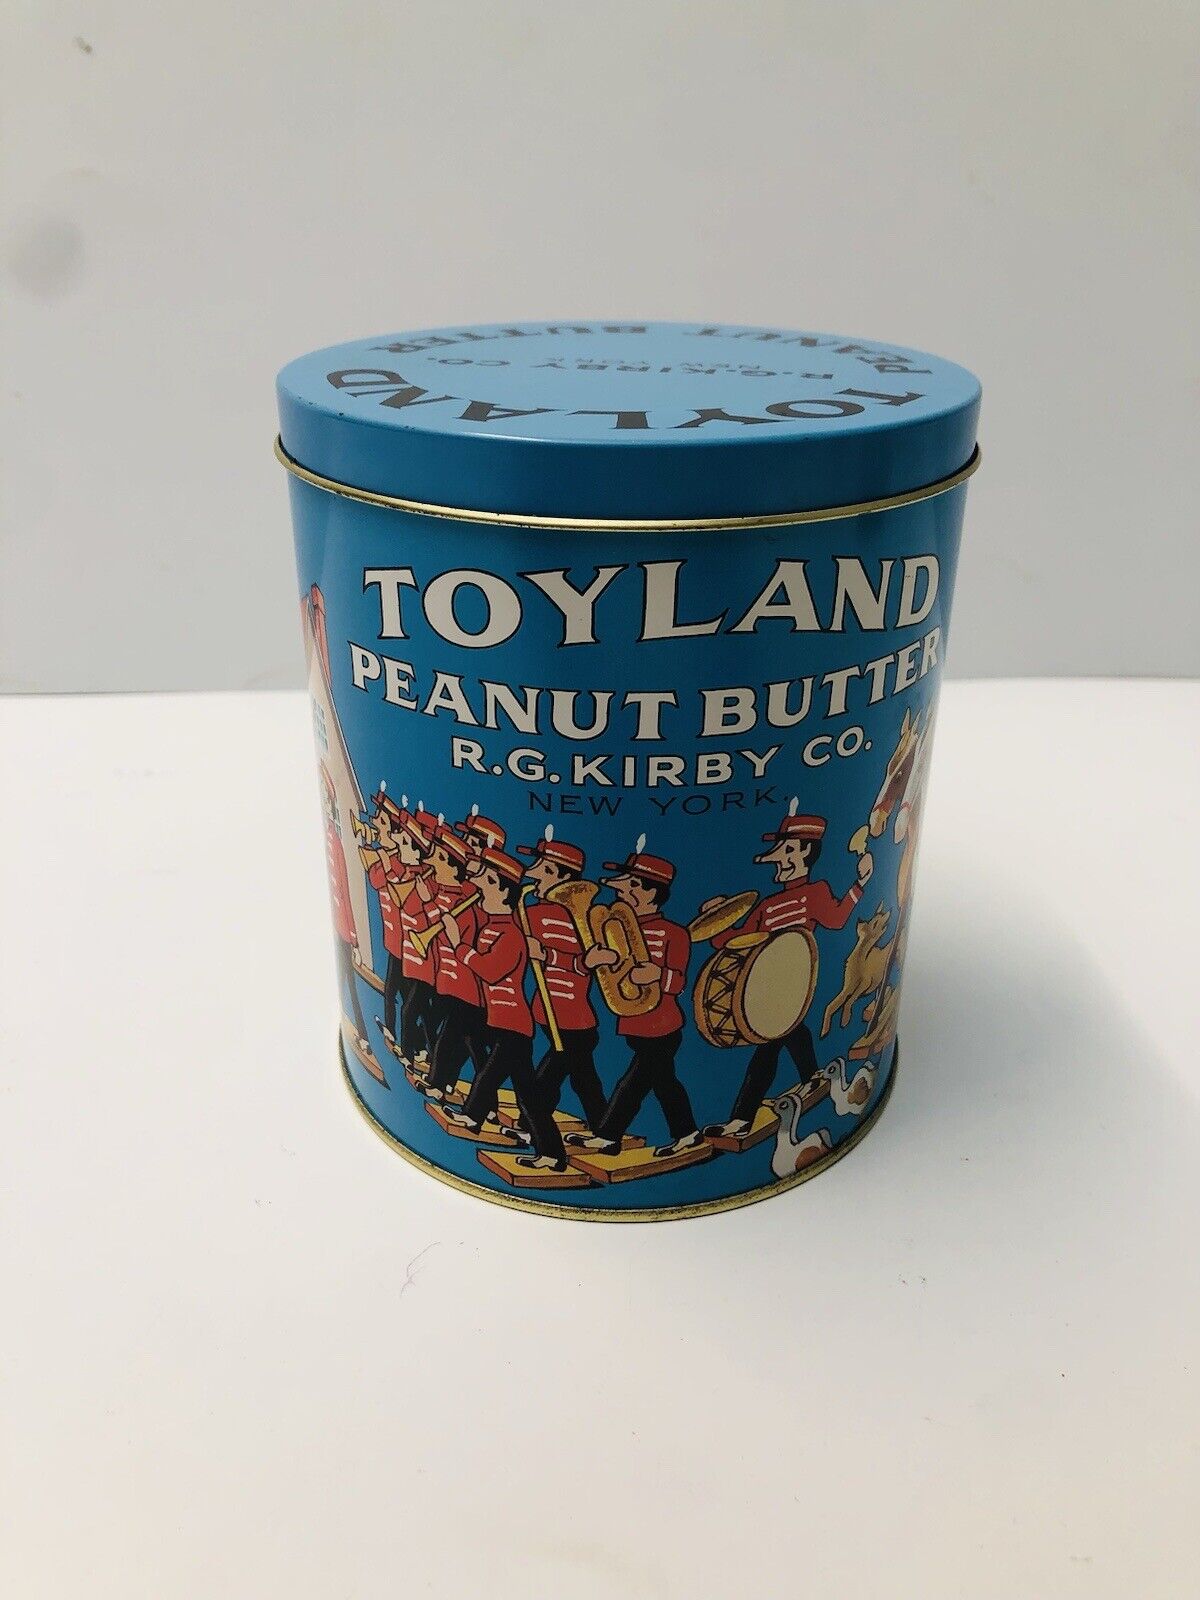 TOYLAND PEANUT BUTTER TIN MADE IN ENGLAND REPLICA HARRY\'S GROCERY R.G. KIRBY CO.